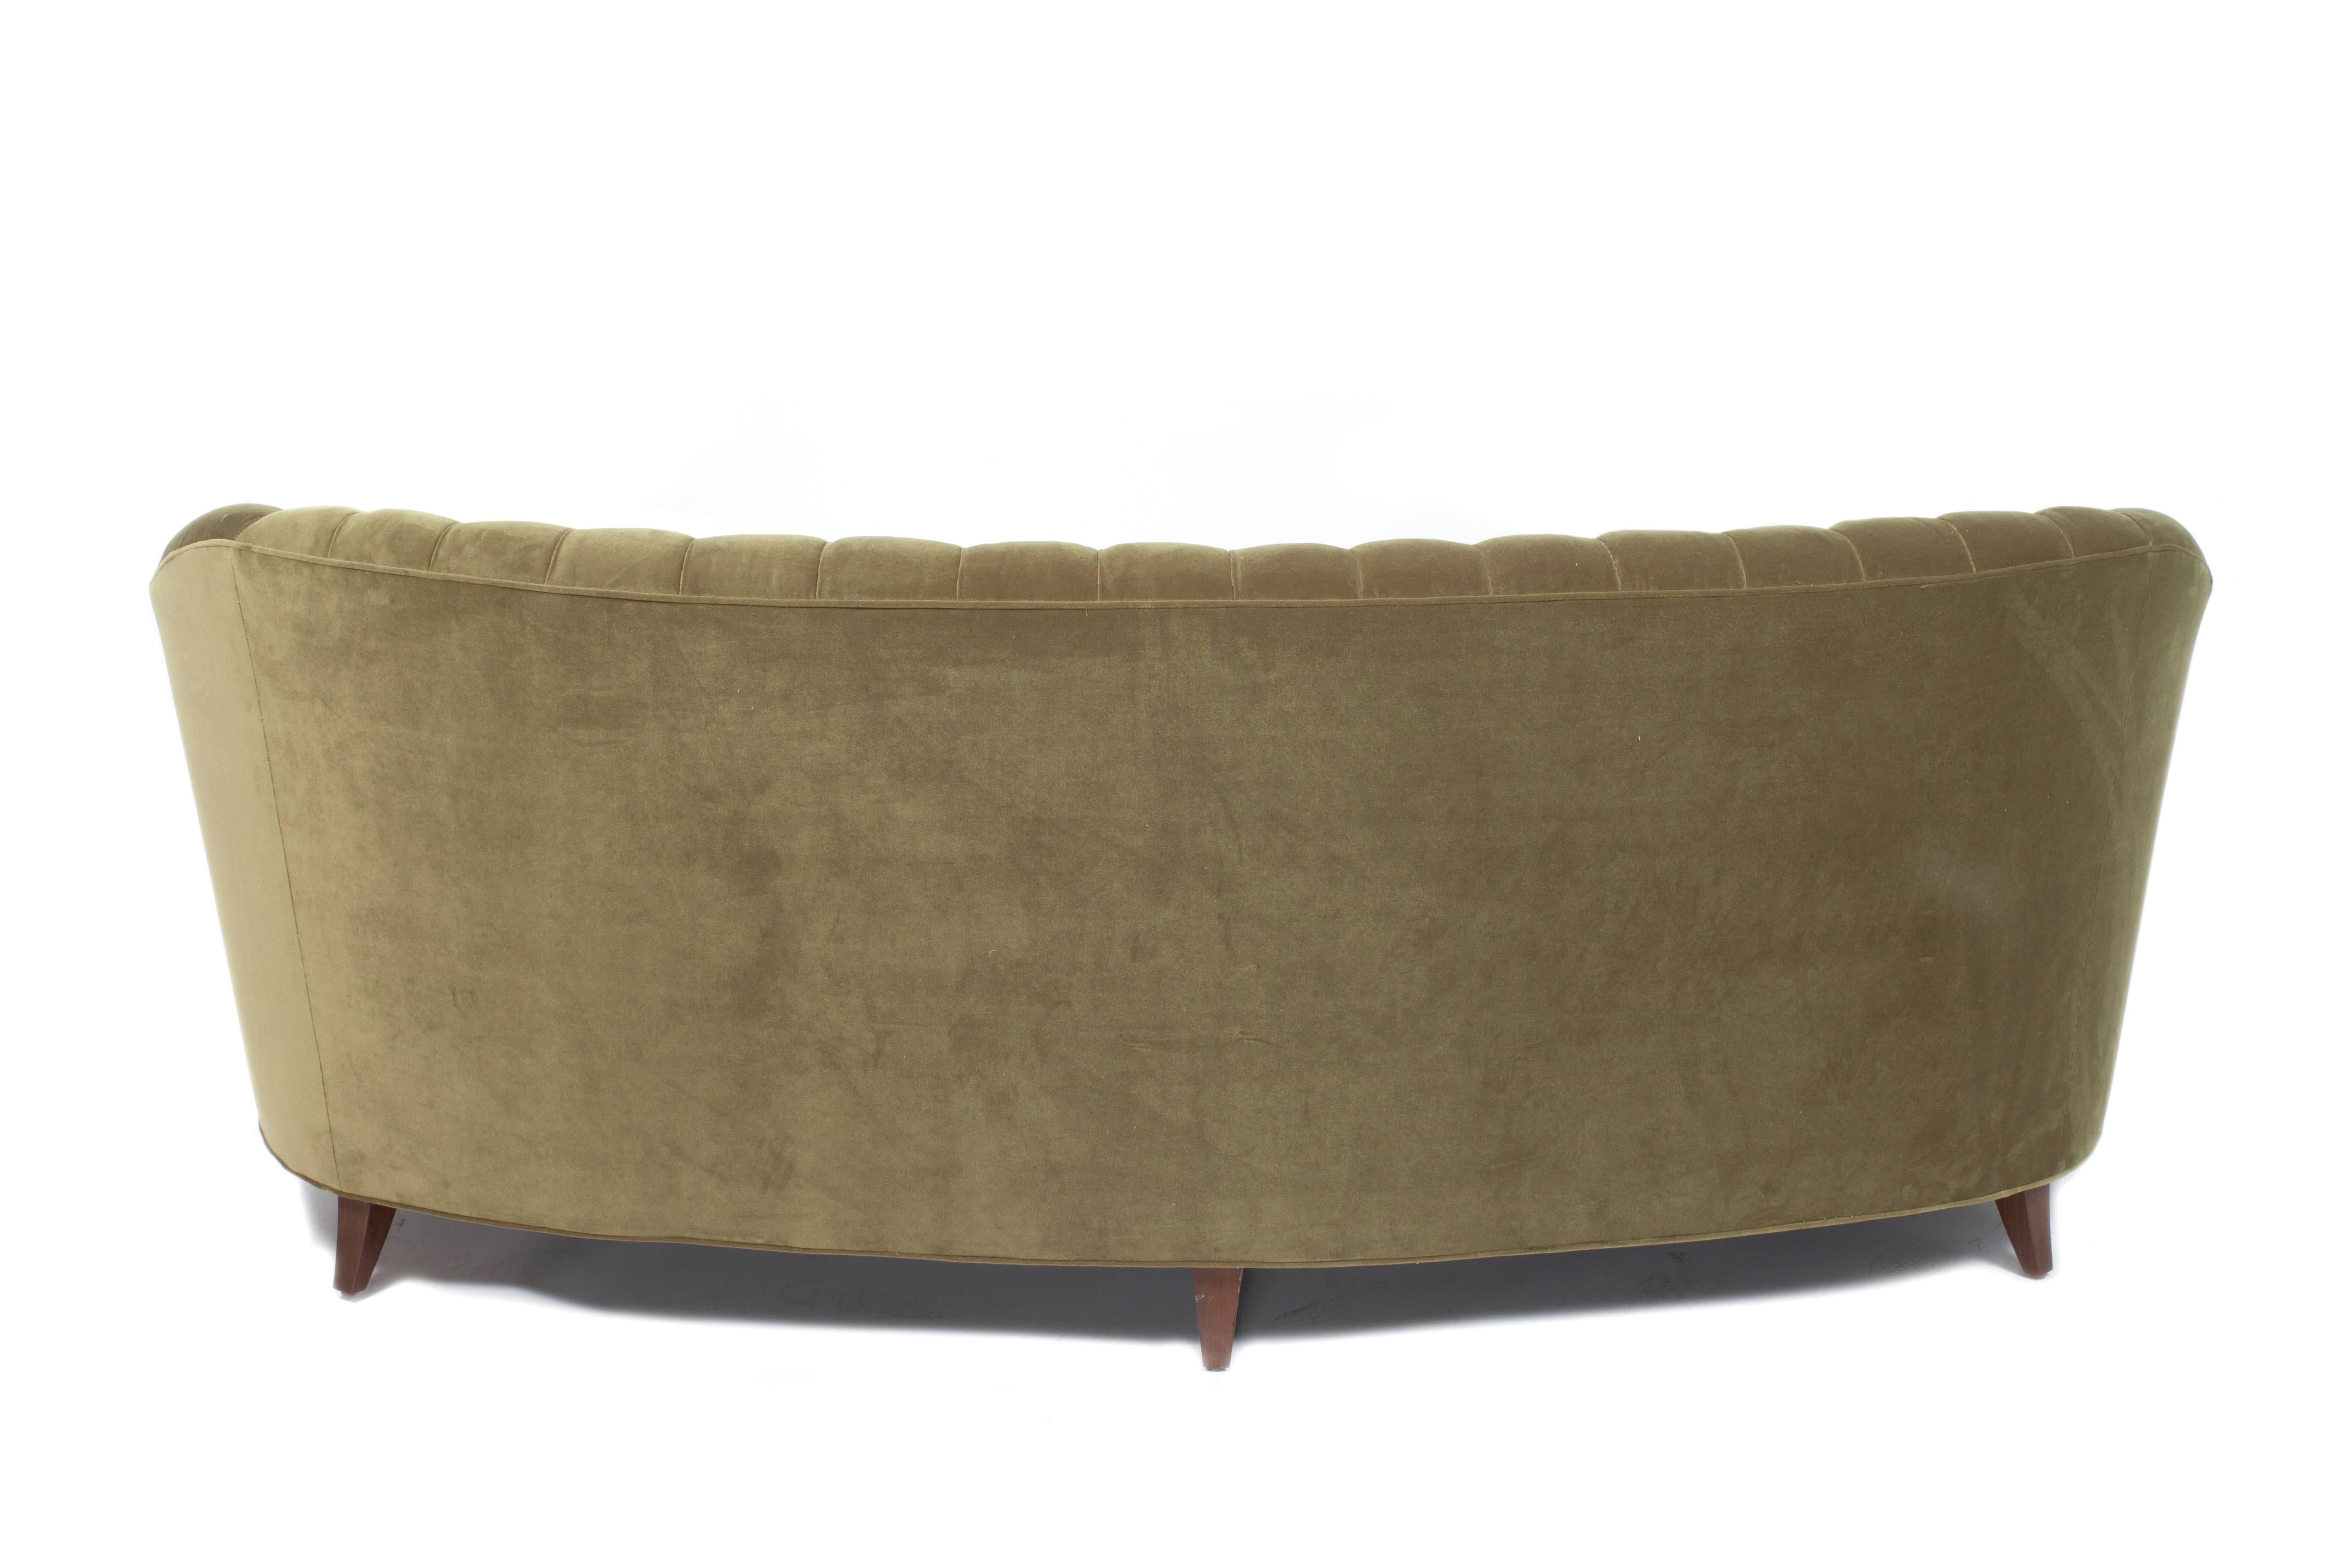 French scalloped and tufted curved sofa beautifully upholstered in green velvet. Three loose seat cushions.